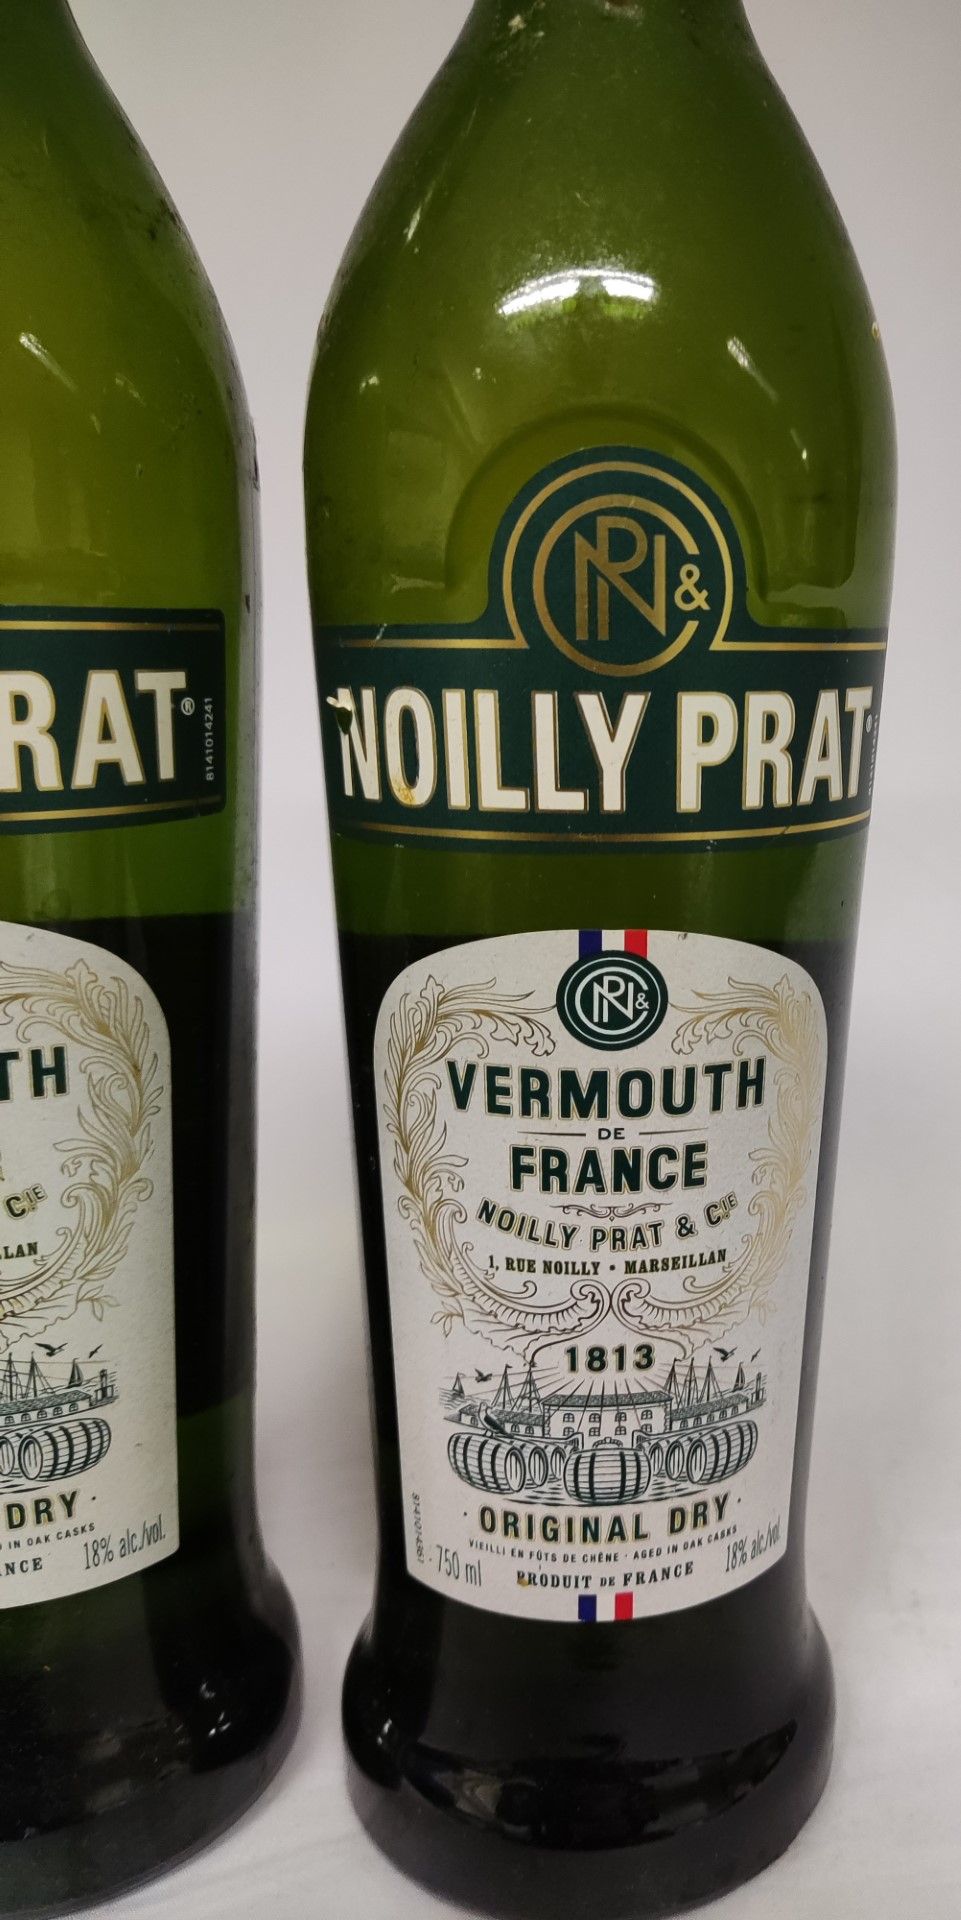 2 x Bottles of Noilly Prat Original Dry Vermouth - 18% - 750Ml Bootles - RRP £34 - Image 4 of 6